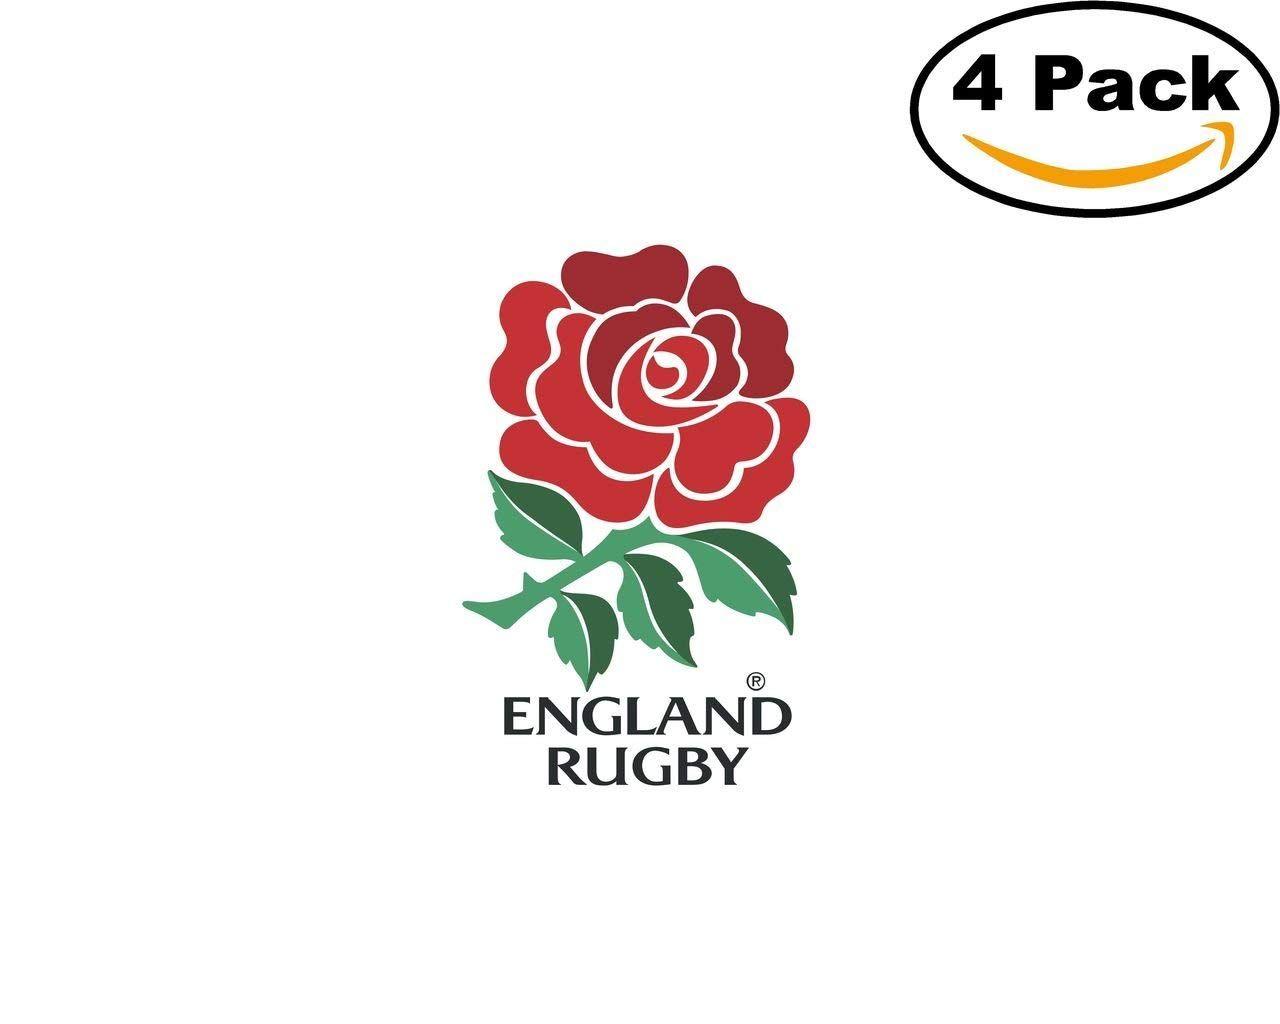 England Rugby 4 Stickers 4X4 inches Car Bumper Window